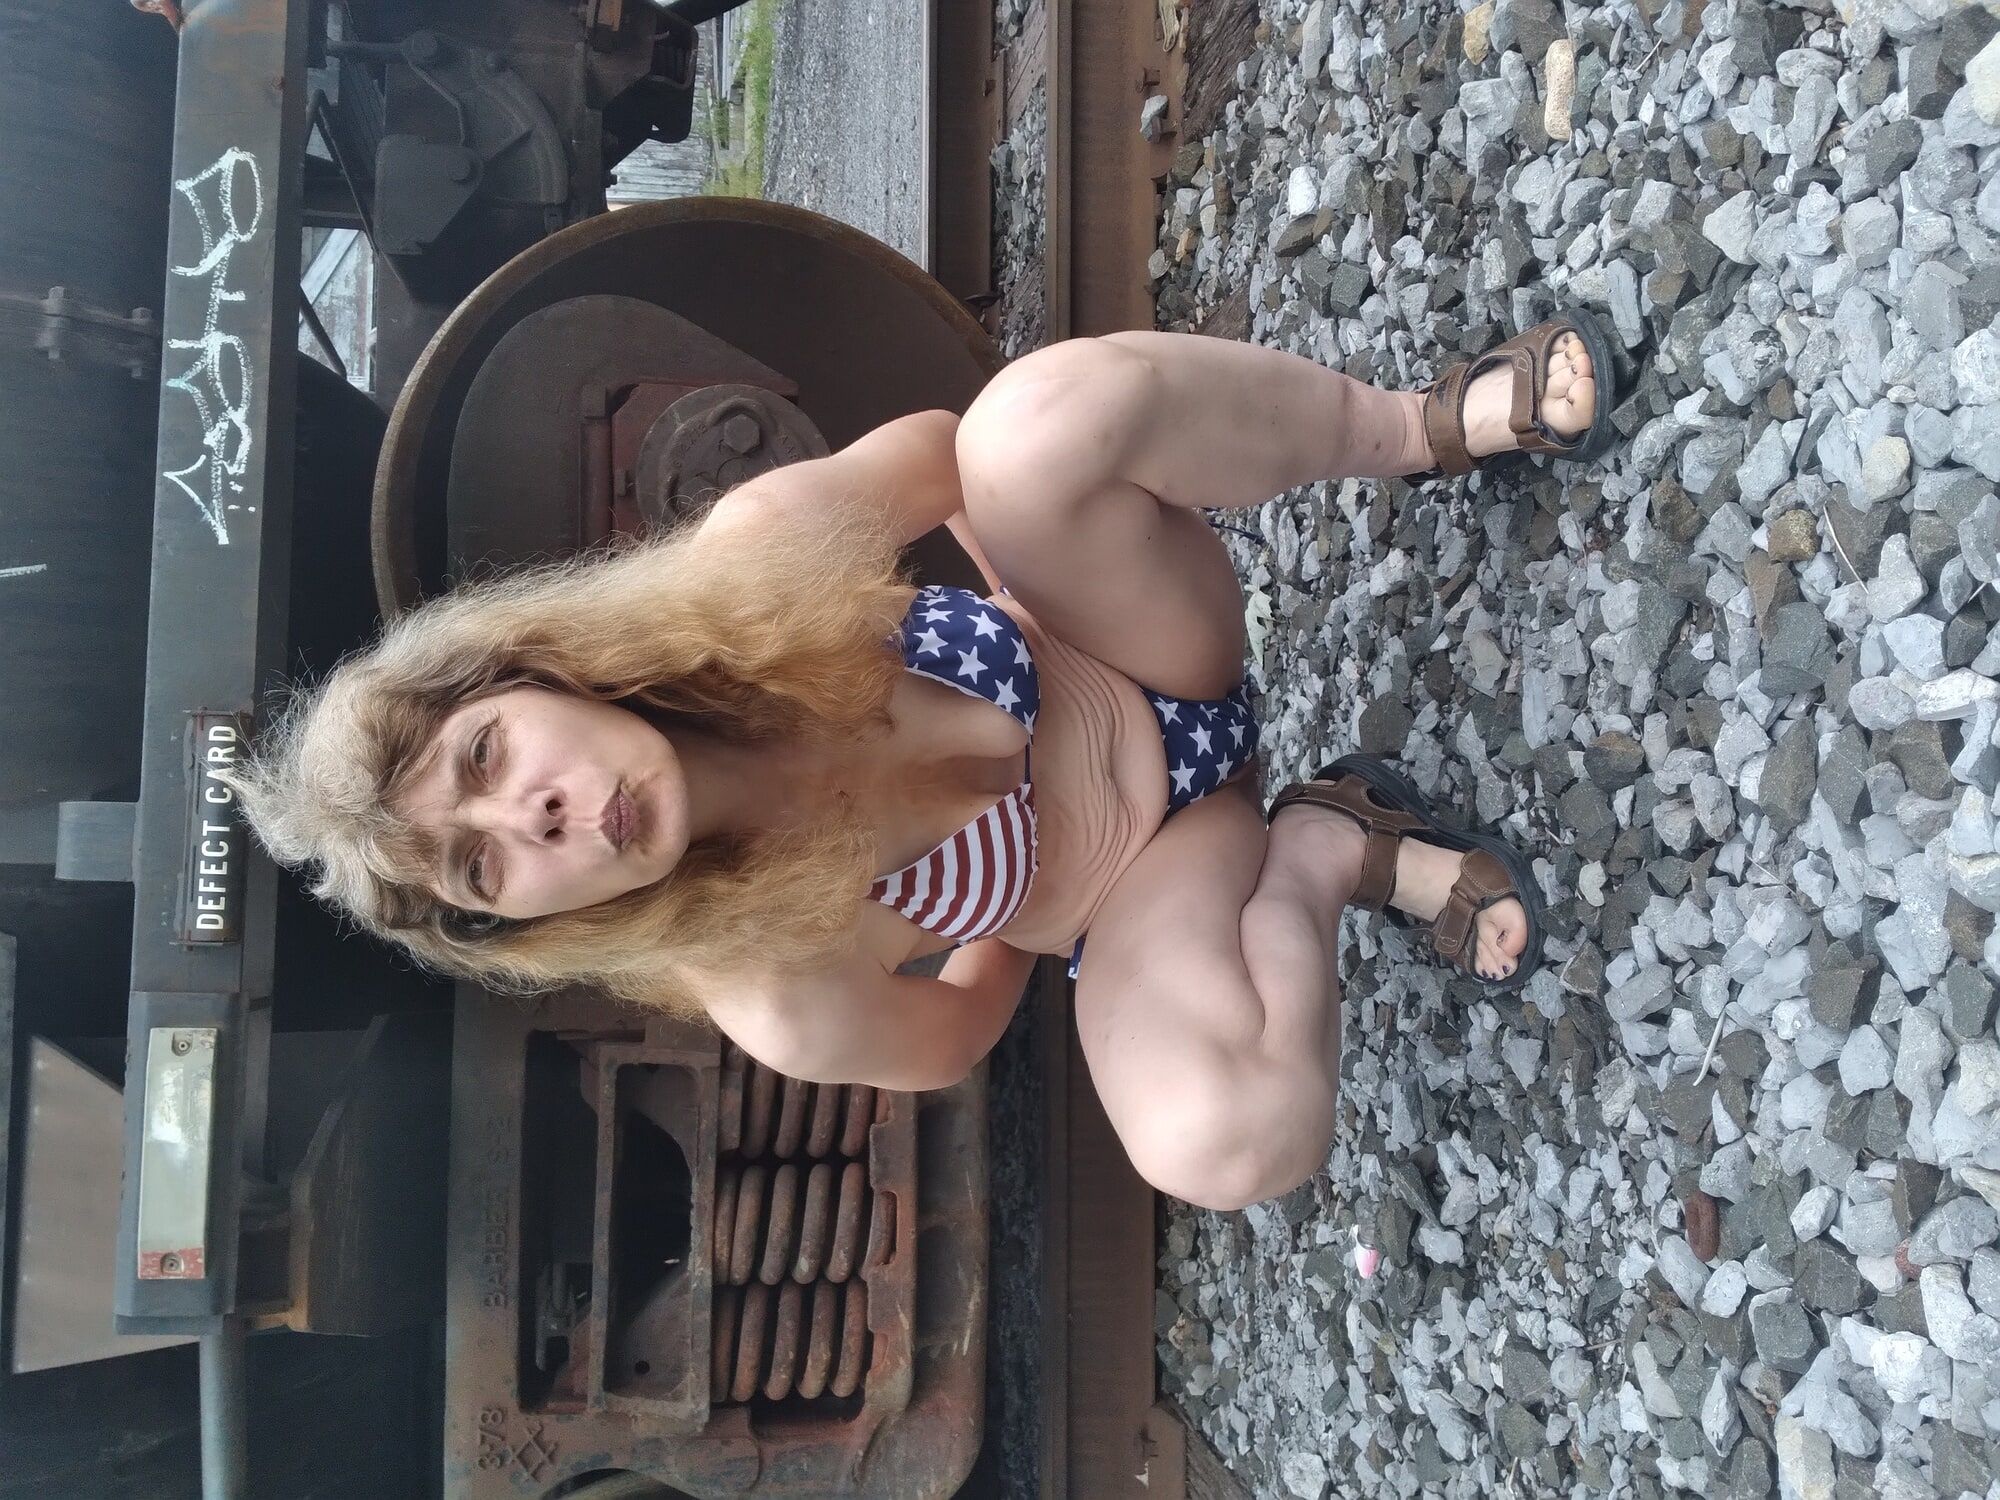 American Train. July 4th release. My best photo set to date. #50